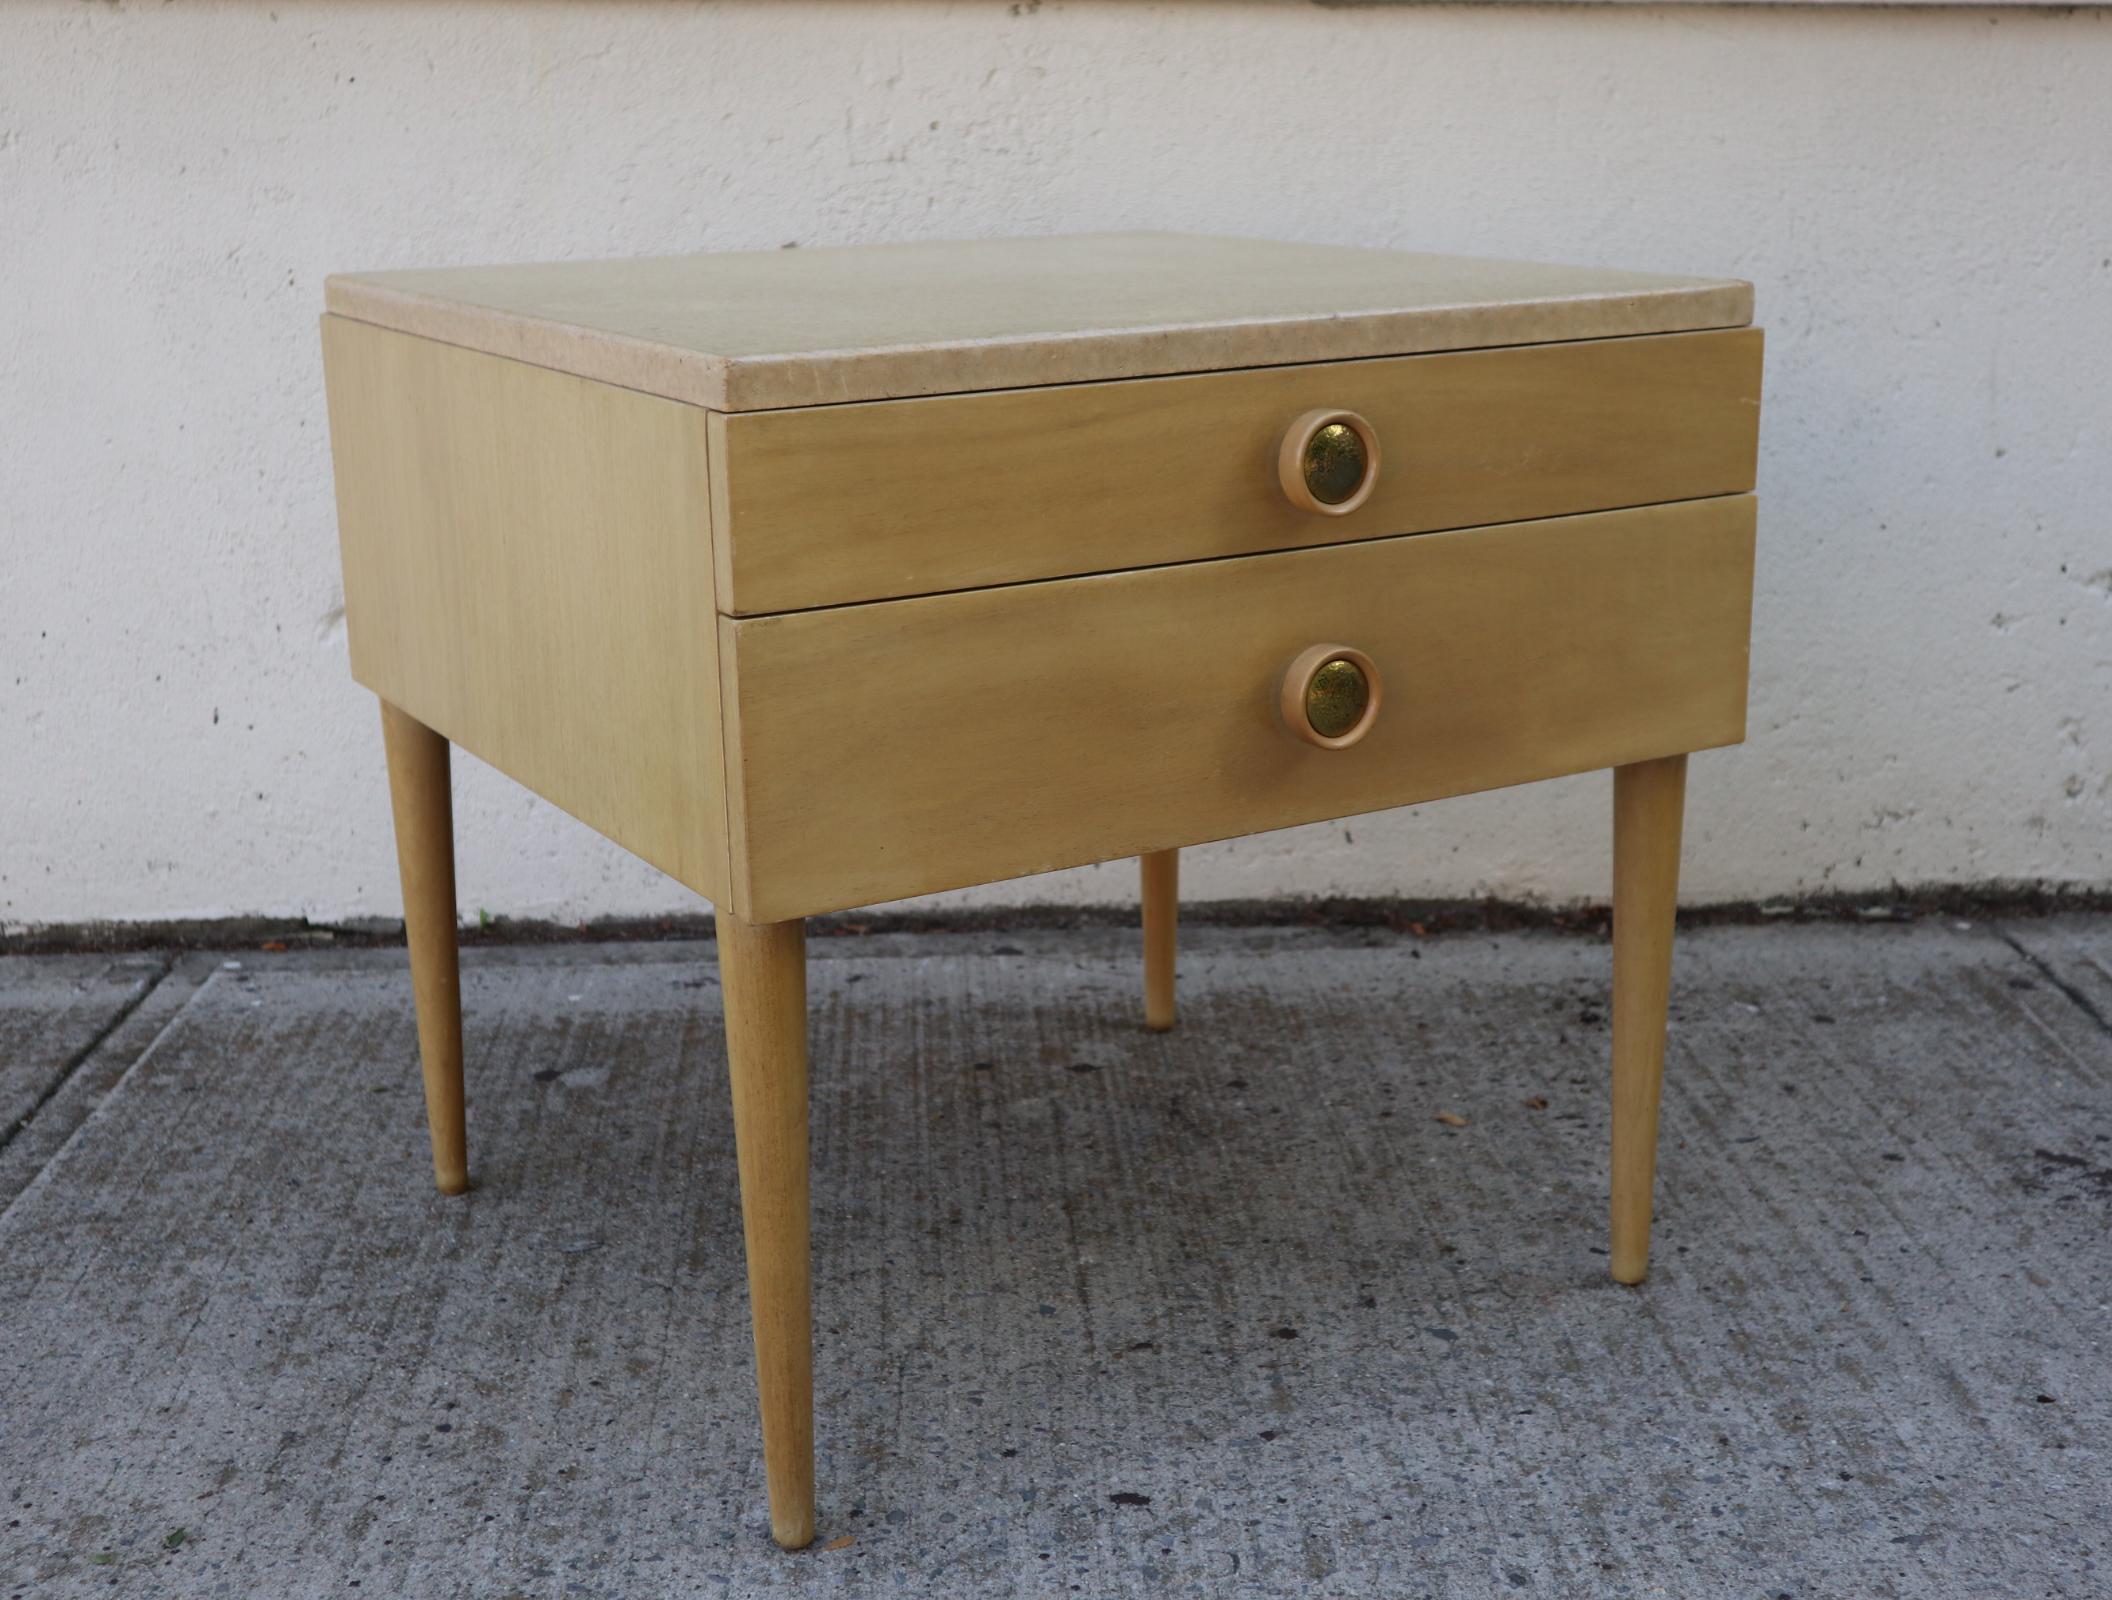 Paul Frankl cork top side table or nightstand. In good condition with normal wear. Square top on slightly tapered legs. Sturdy with fully functioning drawers. Original brass pulls in excellent condition.